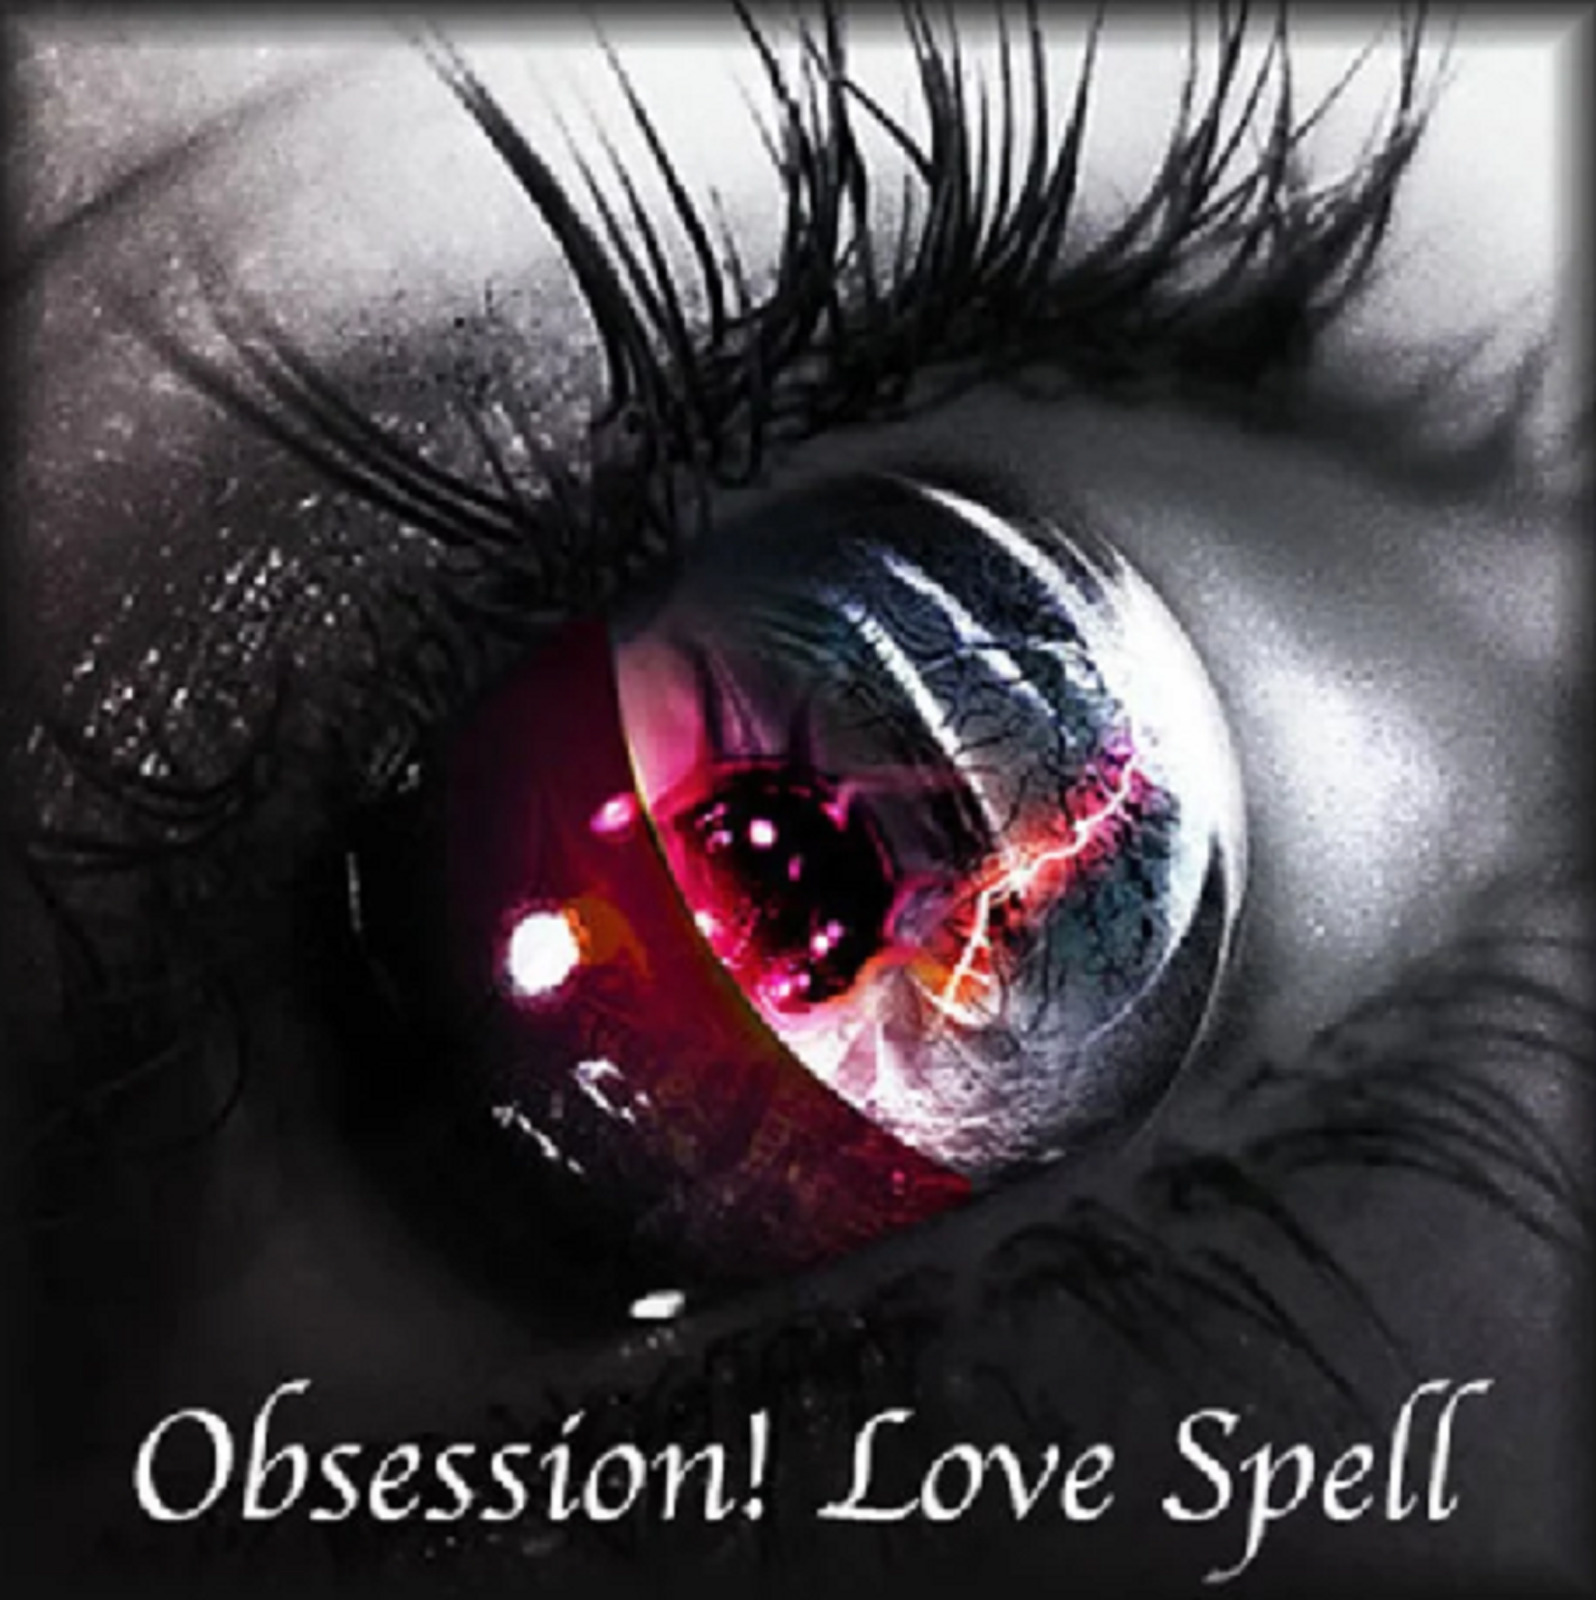 Voodoo | Dark Obsession LOVE SPELL - Make Him/Her LOVE You - Fast Results - Powe